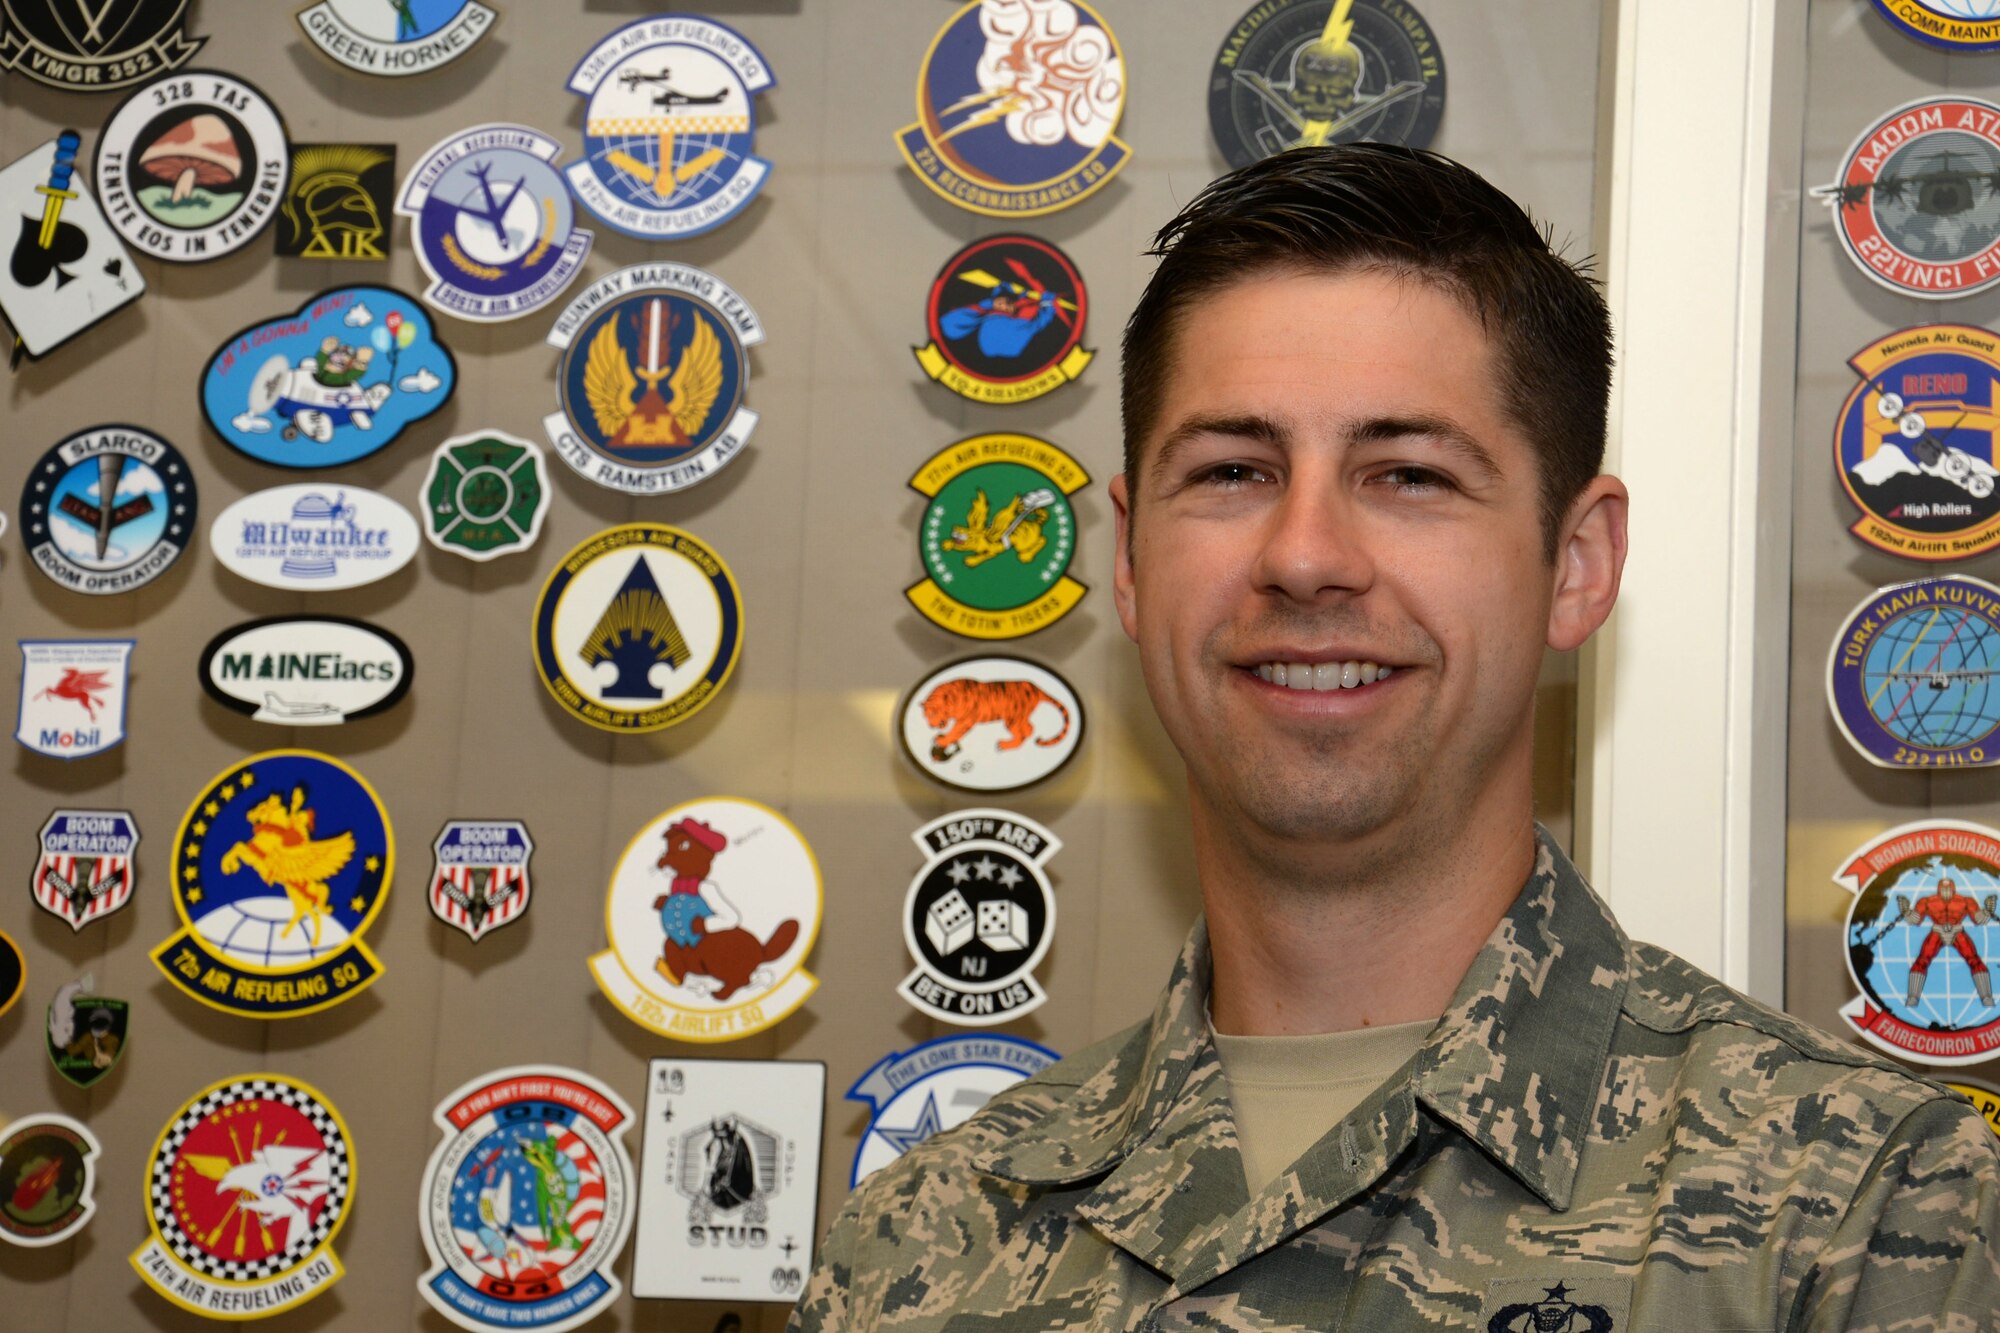 U.S. Air Force Tech. Sgt. Joshua Johnson, 100th Operations Support Squadron NCO in charge of Airfield Management training, poses for a photograph in the aircrew lounge Aug. 11, 2016, on RAF Mildenhall, England. Johnson practices the 100th Air Refueling Wing’s vision of ‘Ready, Balanced, Better.’ (U.S. Air Force photo by Gina Randall)